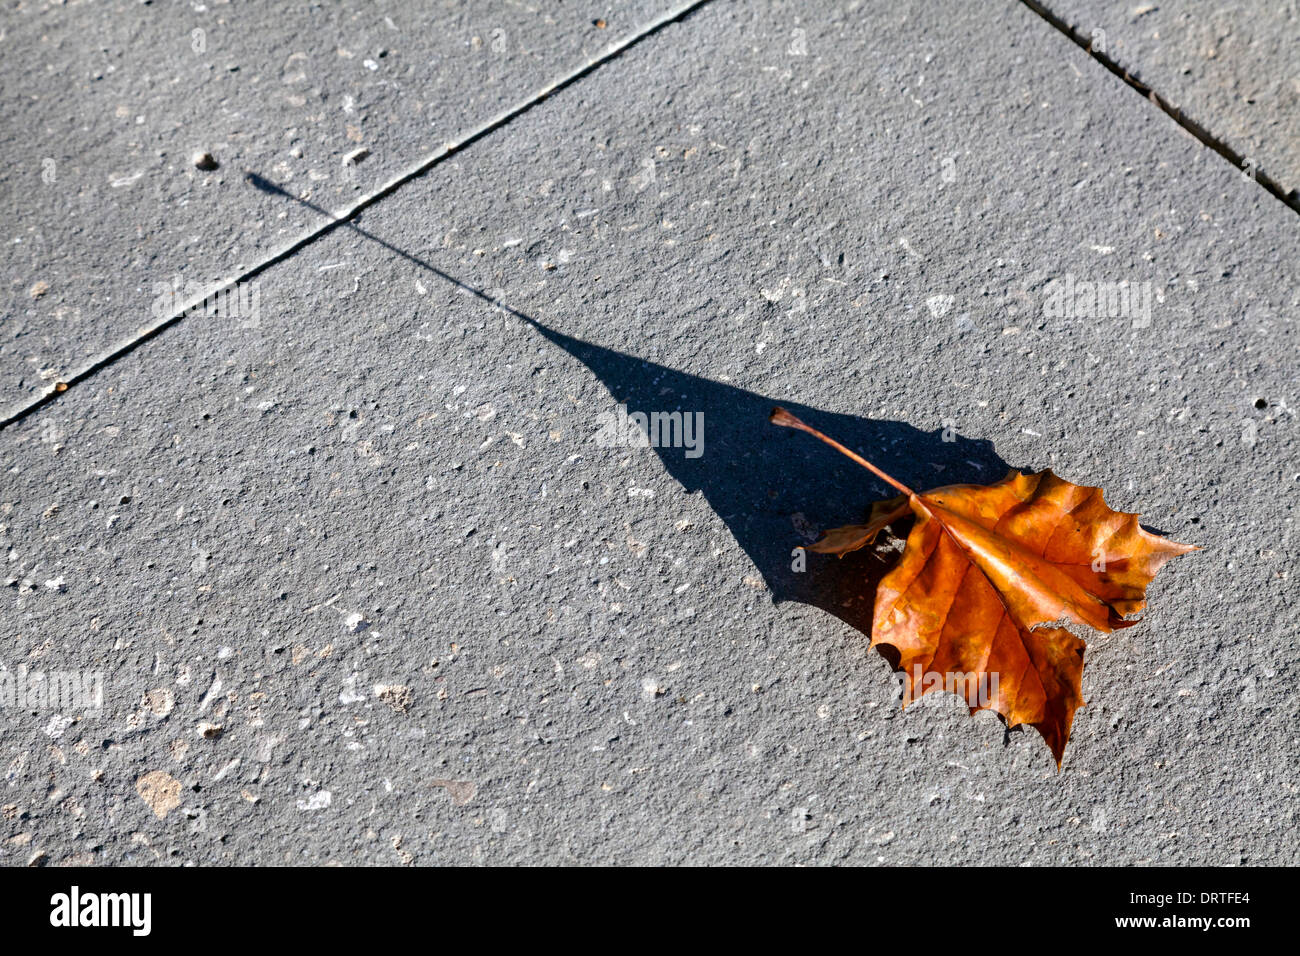 Dry-red-Sycamore-leaf-casts-long-shadow-